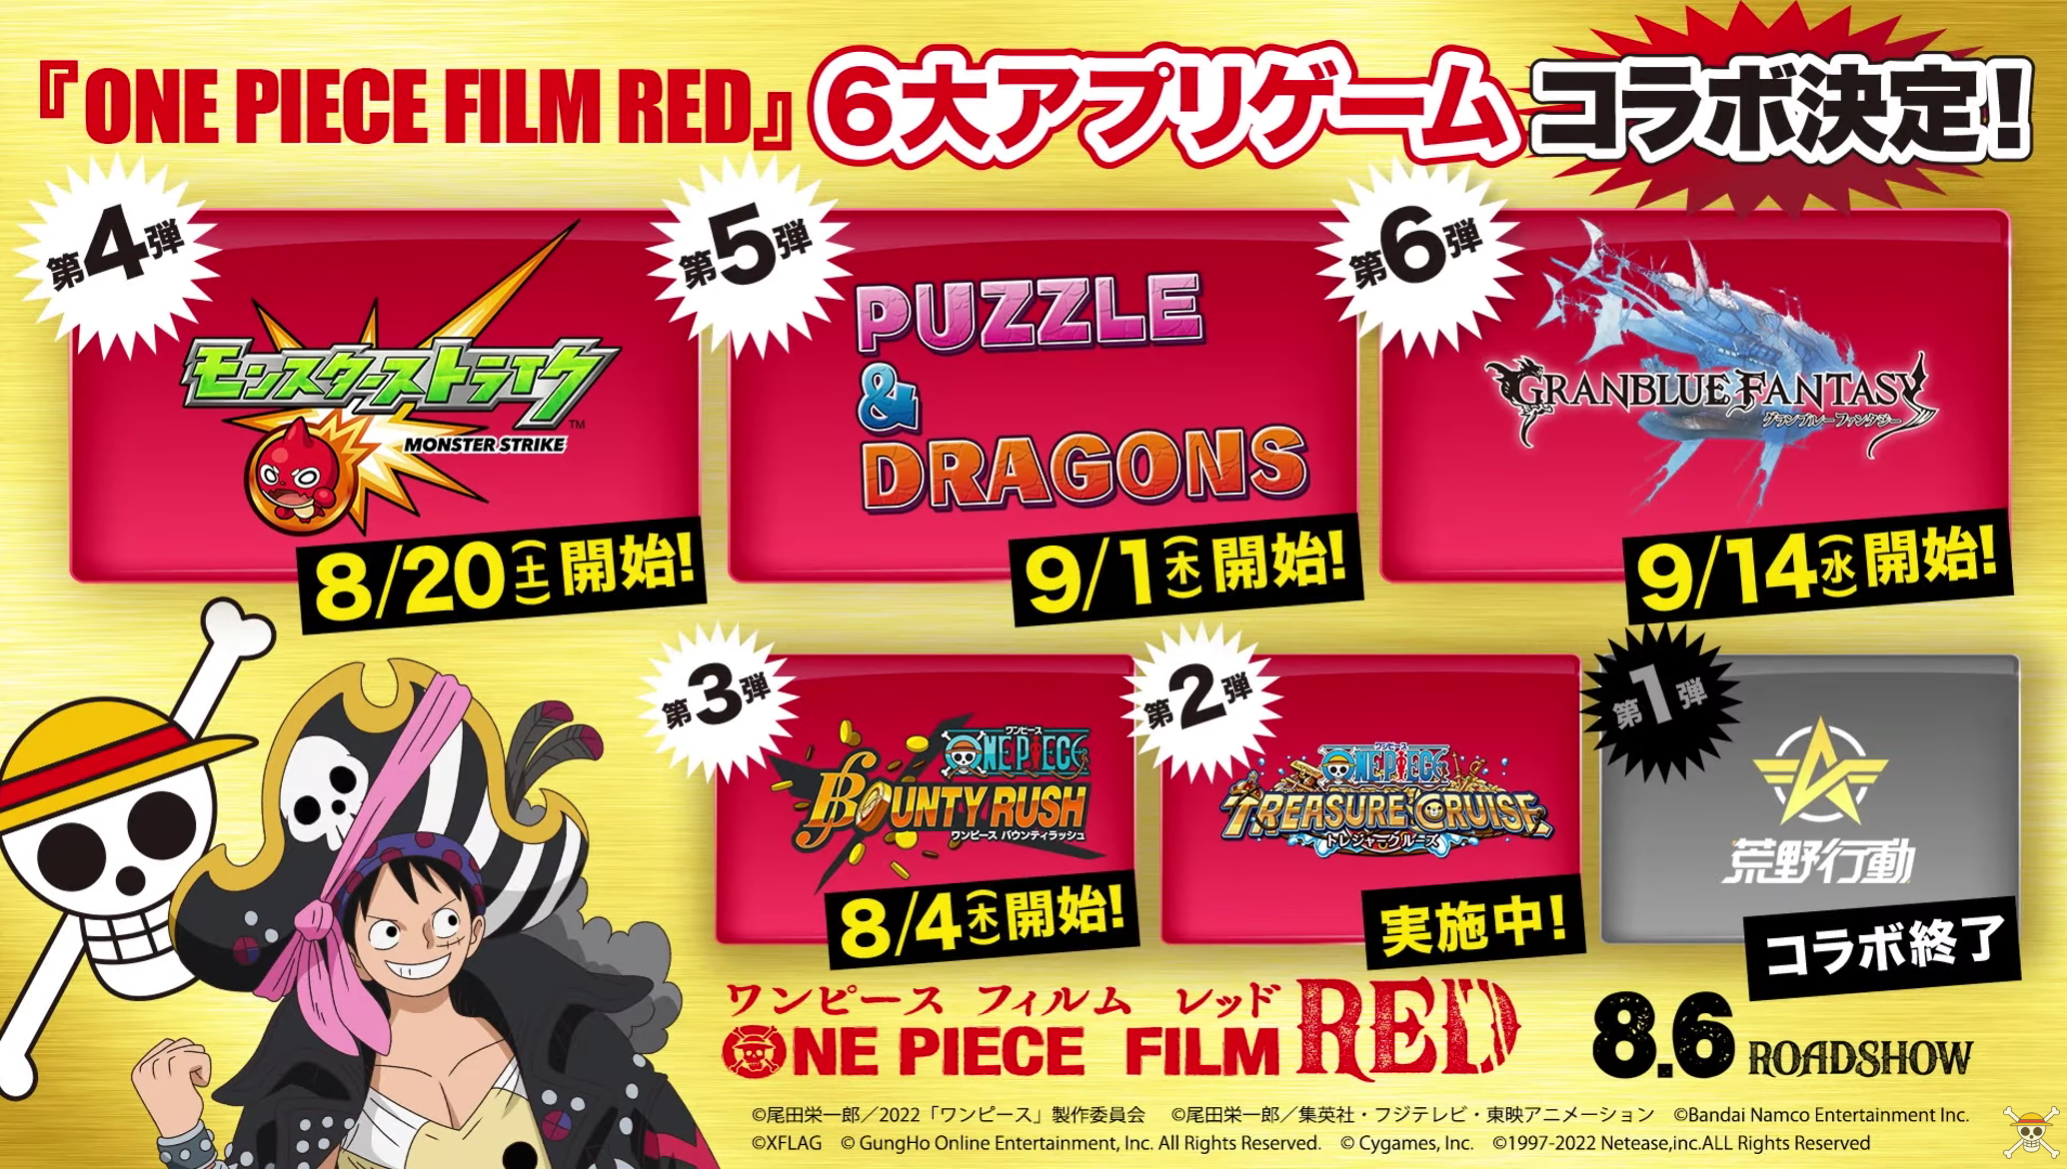 ONE PIECE FILM RED with 6 mobile games